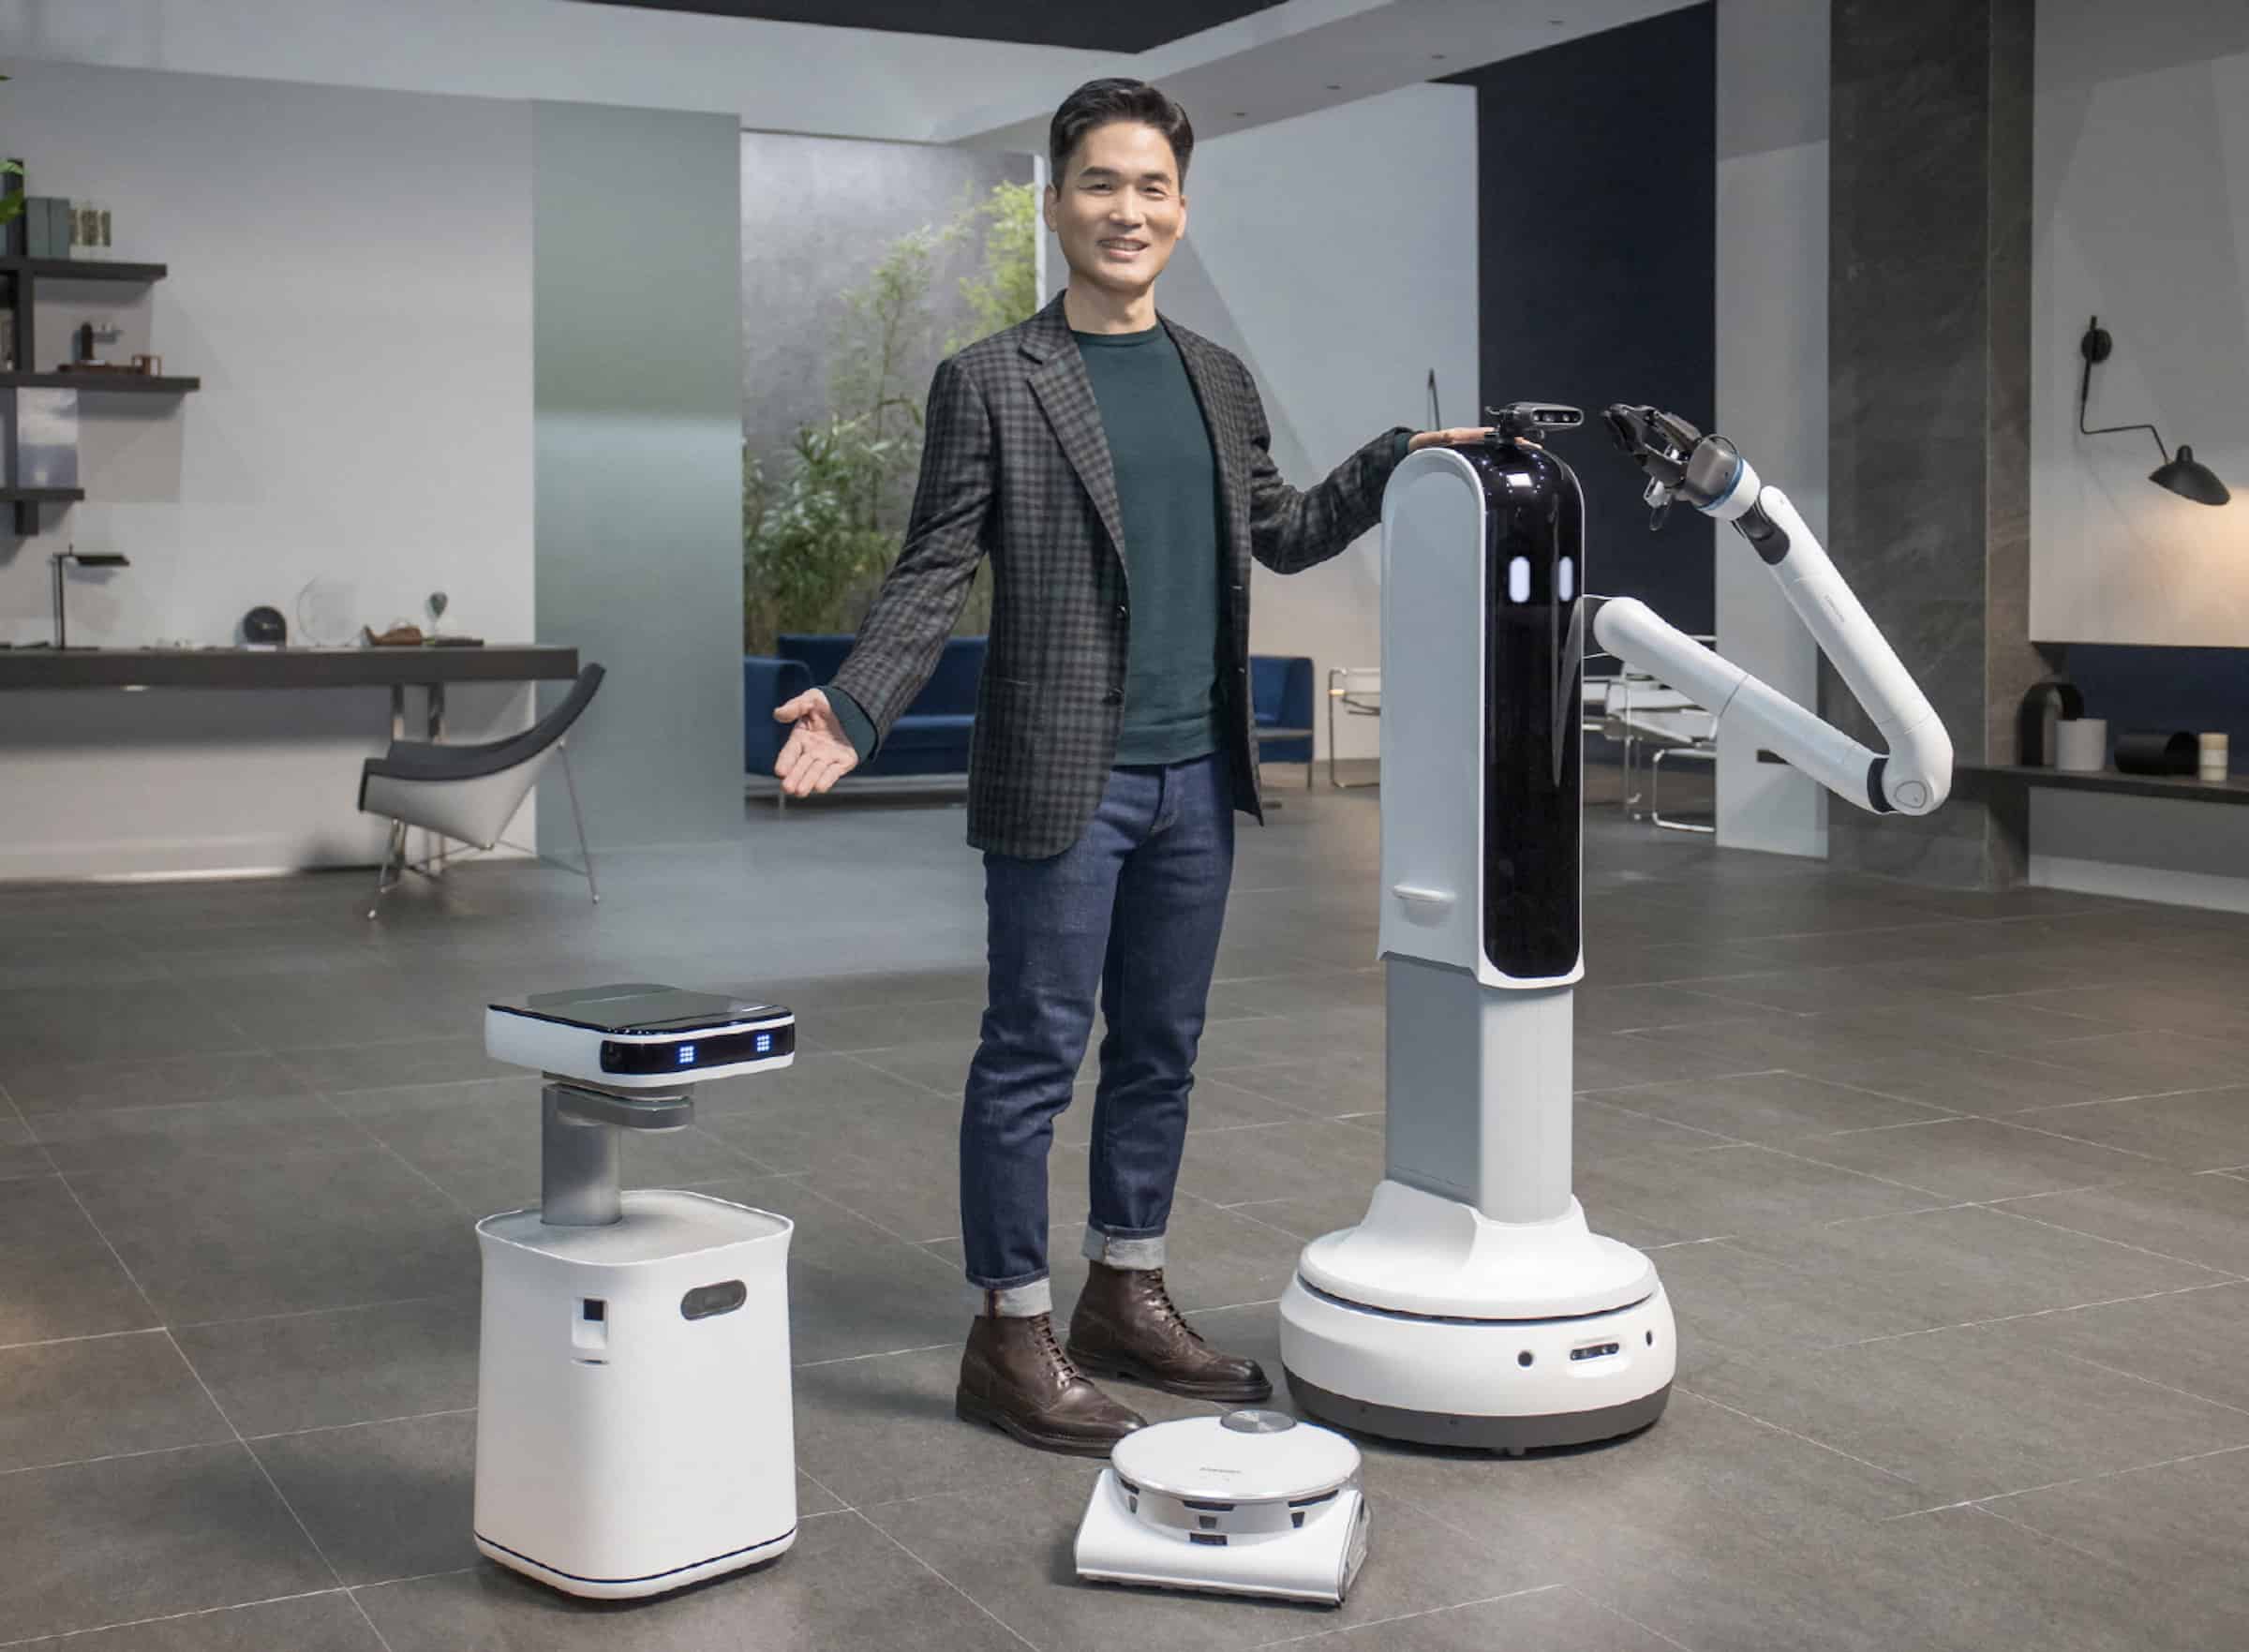 Robots in your home to help with all sorts of cleaning and companionship